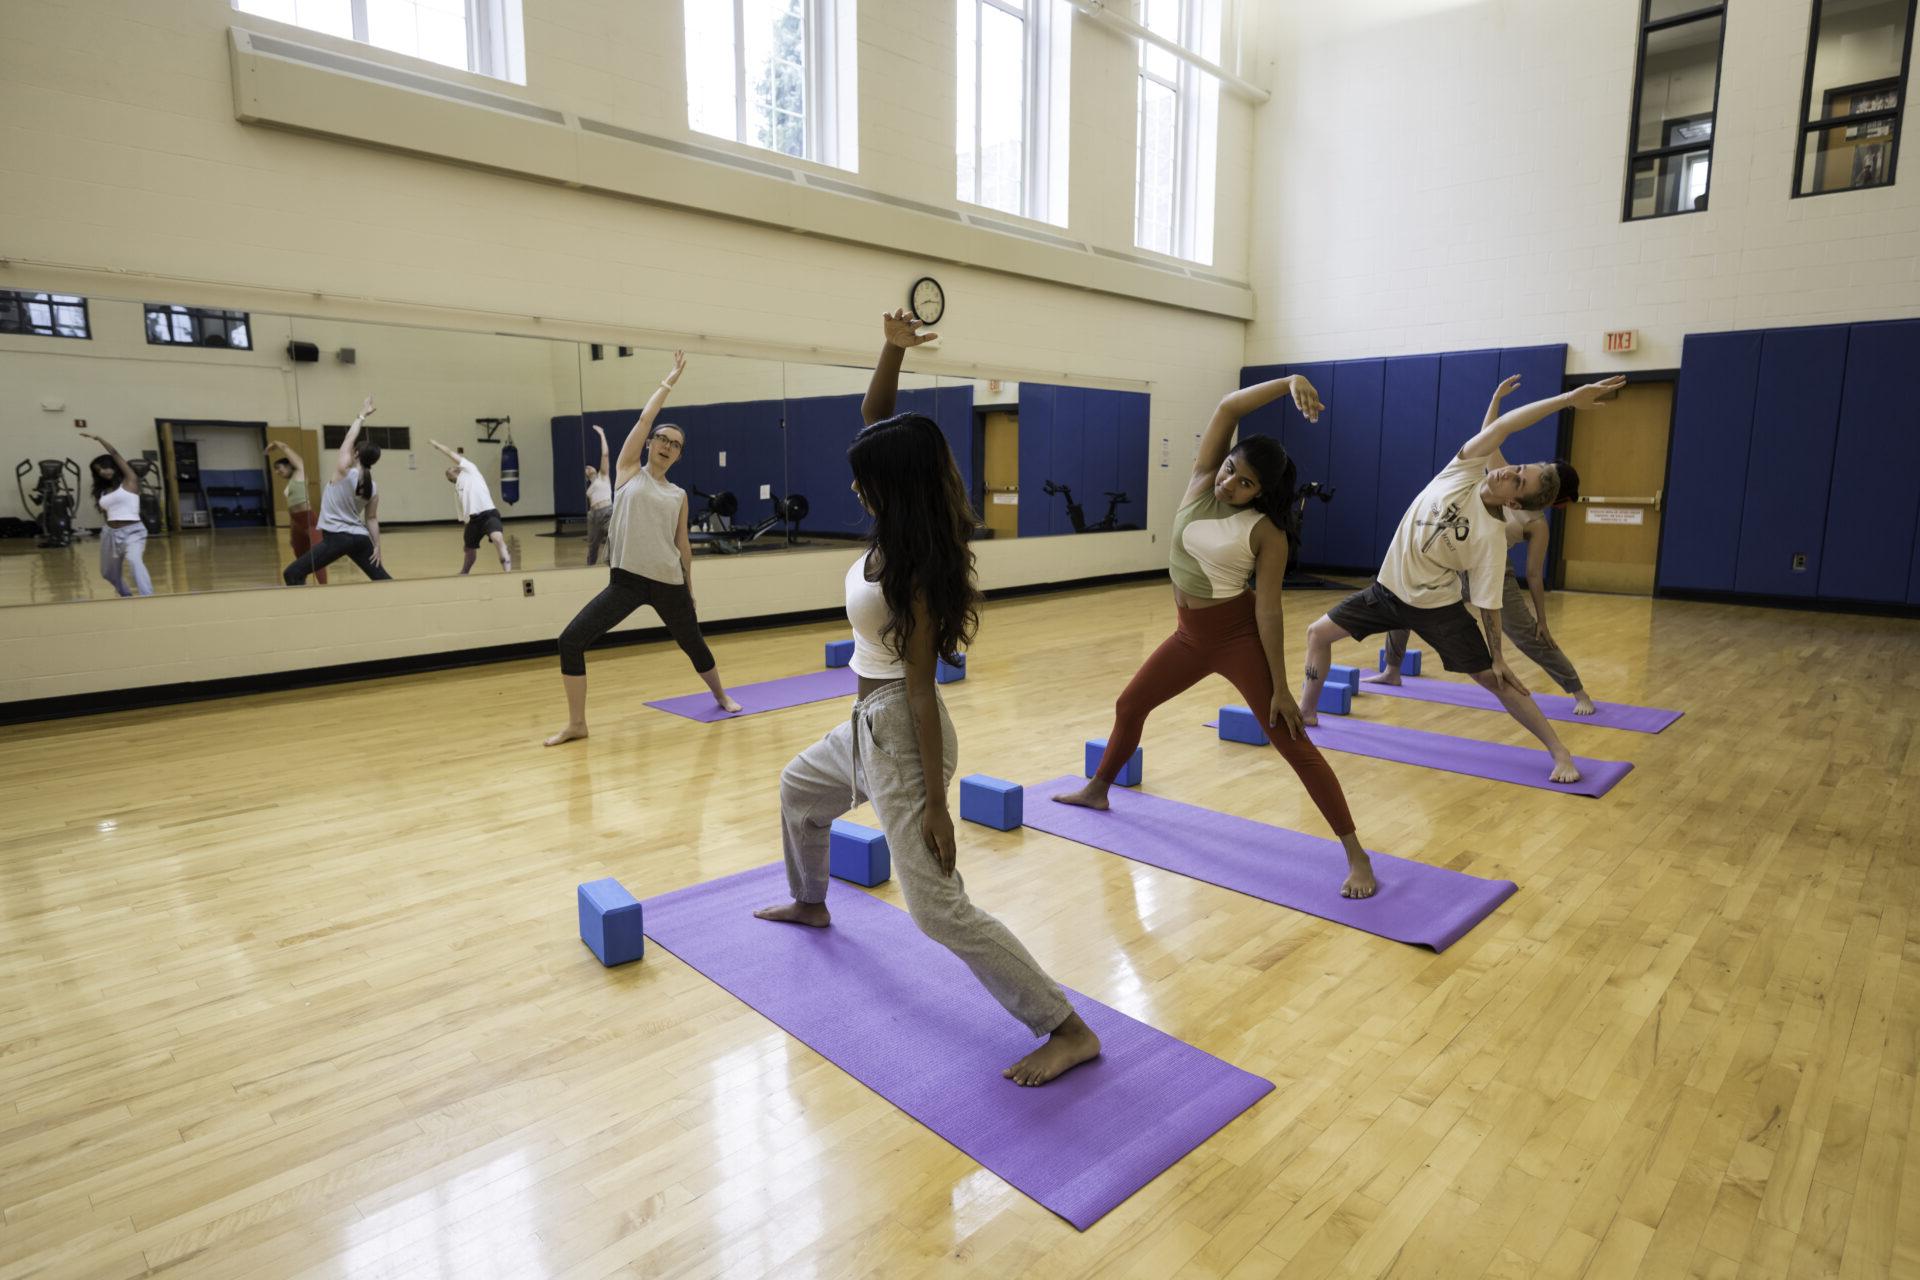 Students practicing yoga facing toward a wall with a mirror, with an instructor at the front of the room